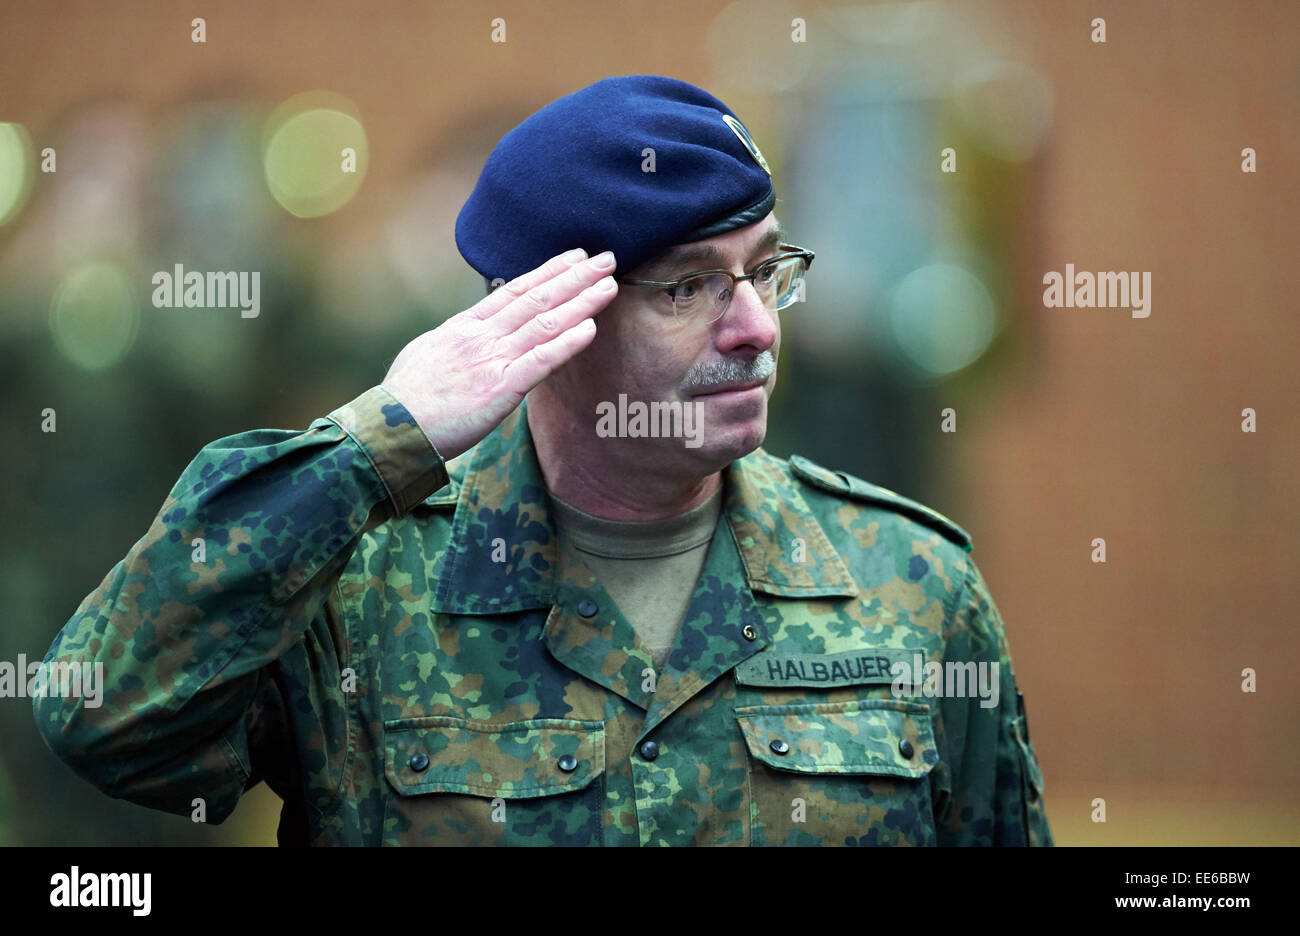 Muenster, Germany. 14th Jan, 2015. The German commander of the 1 (German/Netherlands) Corps, Lieutenant General Volker Halbauer, salutes during the handing over ceremony of the Nato Response Force (NRF) in Muenster, Germany, 14 January 2015. The 1 (German/Netherlands) Corps has taken over the NRF command from France as scheduled. PHOTO: BERND THISSEN/dpa/Alamy Live News Stock Photo